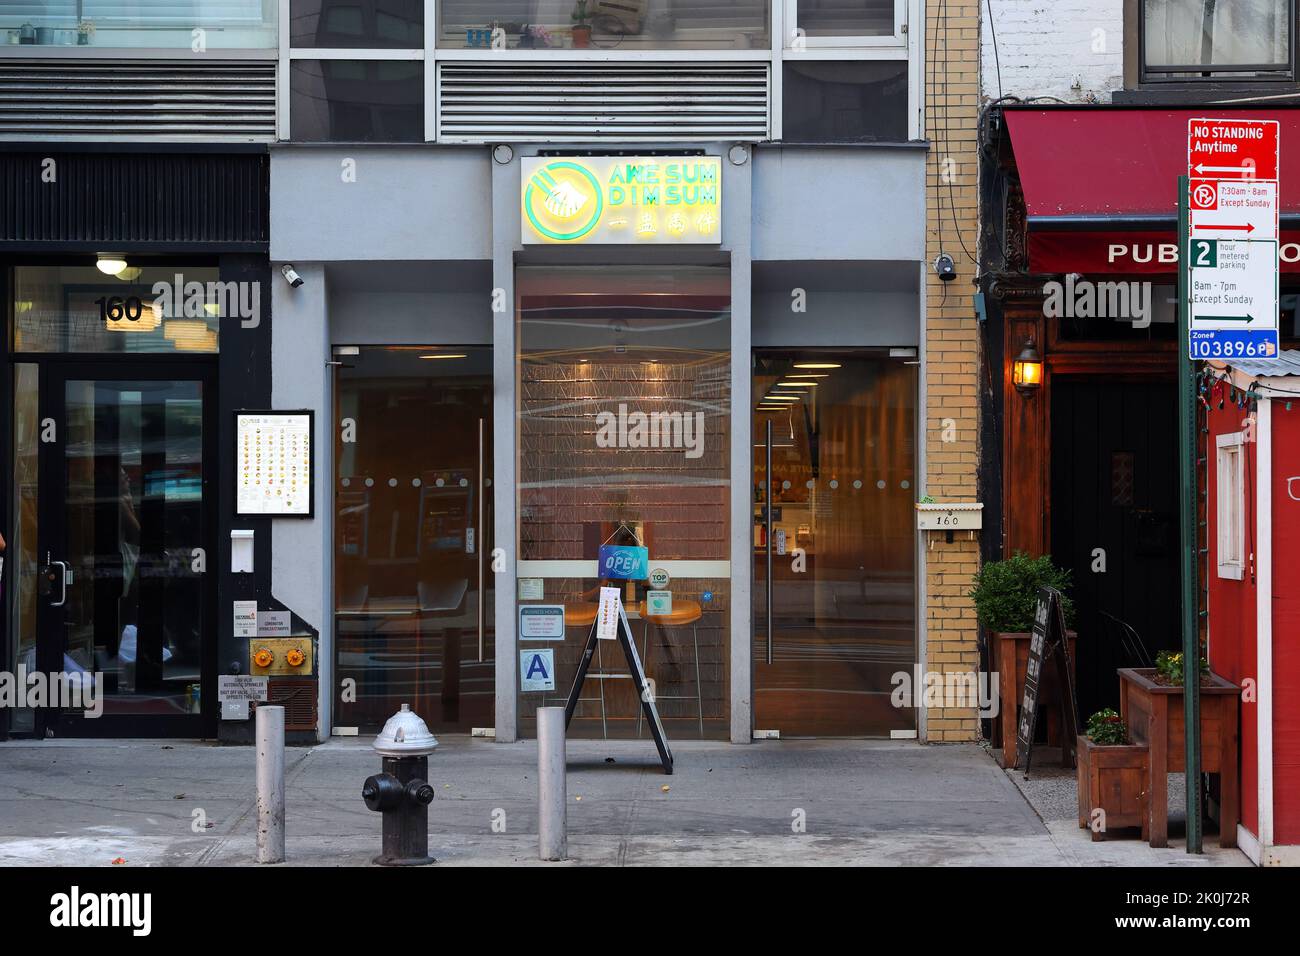 AweSum DimSum, 160 E 23rd St, New York, NYC storefront photo of a Cantonese Chinese awe sum dim sum restaurant in the Gramercy neighborhood. Stock Photo